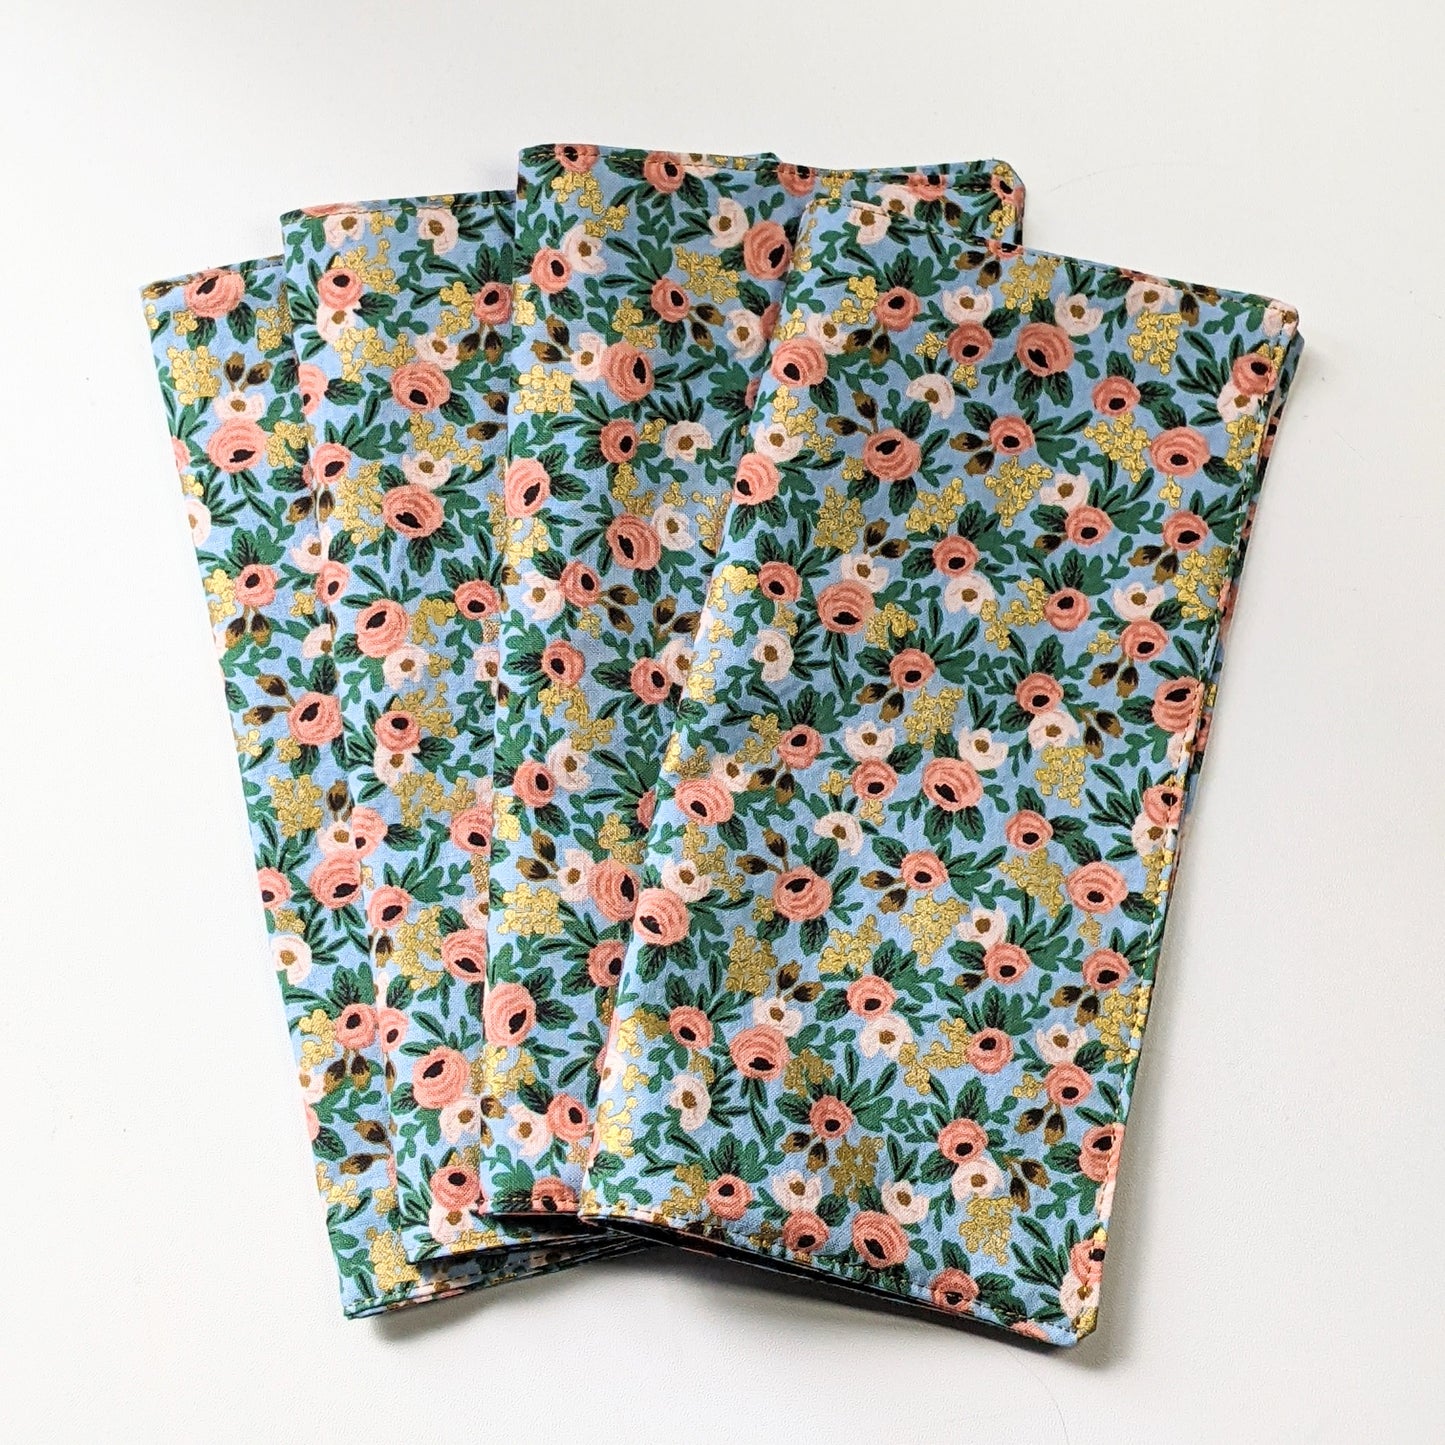 Cloth napkins: coral and blue floral